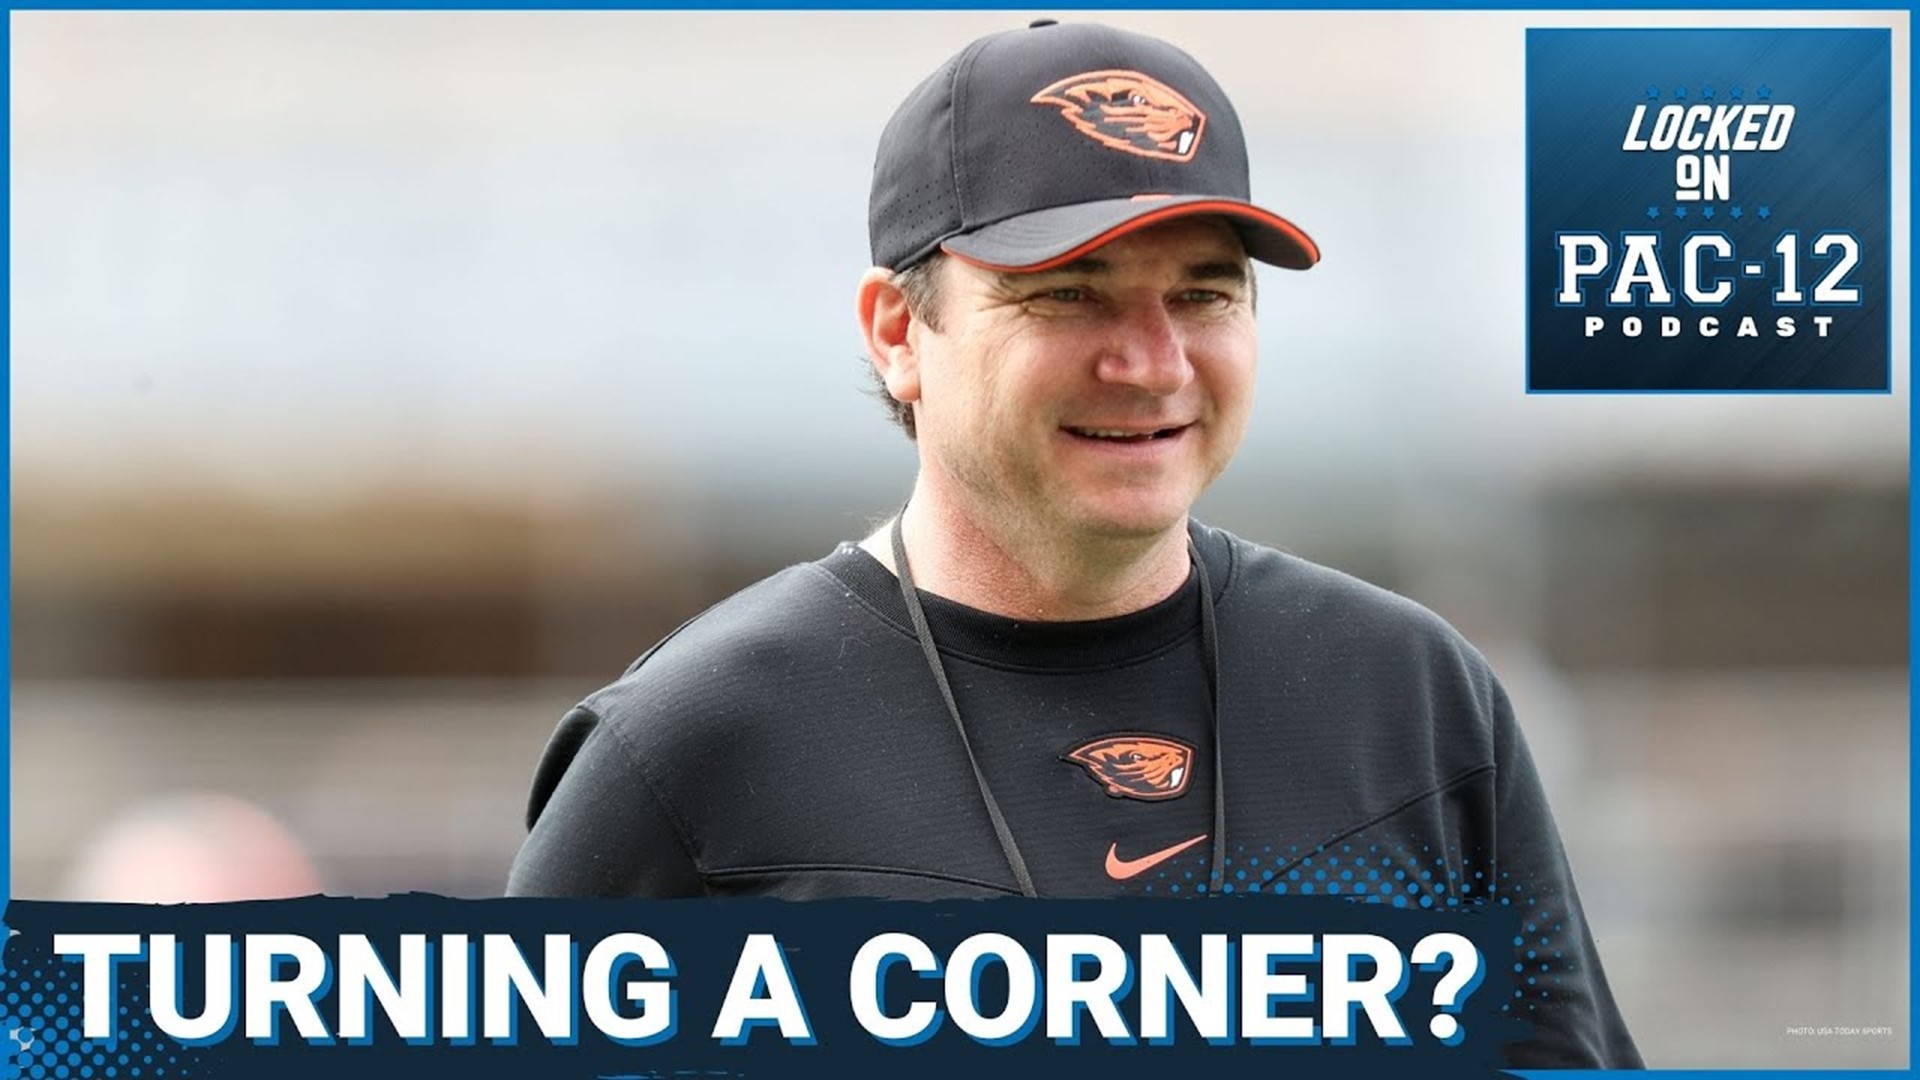 Oregon State Football has had a slow and steady build under Jonathan Smith, and are now seeking to launch their brand as a program to levels it hasn't been before.